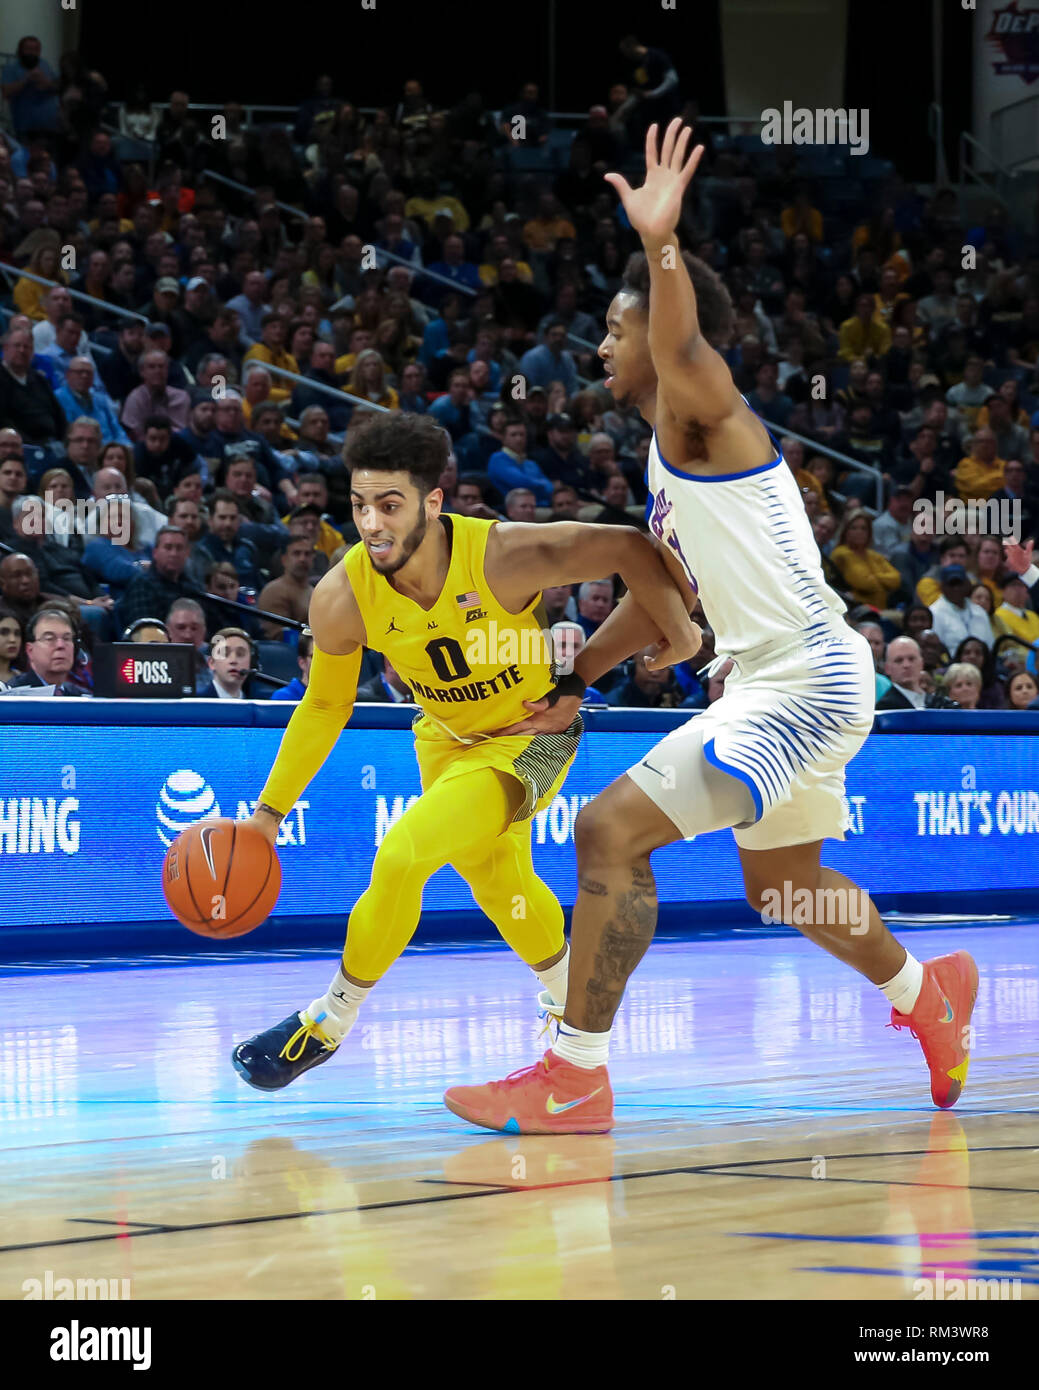 Chicago, USA. 12th Feb 2019. Marquette Golden Eagles guard Markus Howard (0) drives past the defense of DePaul Blue Demons guard Eli Cain (11) during NCAA basketball game between the Marquette Golden Eagles and the DePaul University Blue Demons at Wintrust Arena in Chicago IL. Gary E. Duncan Sr/CSM Credit: Cal Sport Media/Alamy Live News Stock Photo